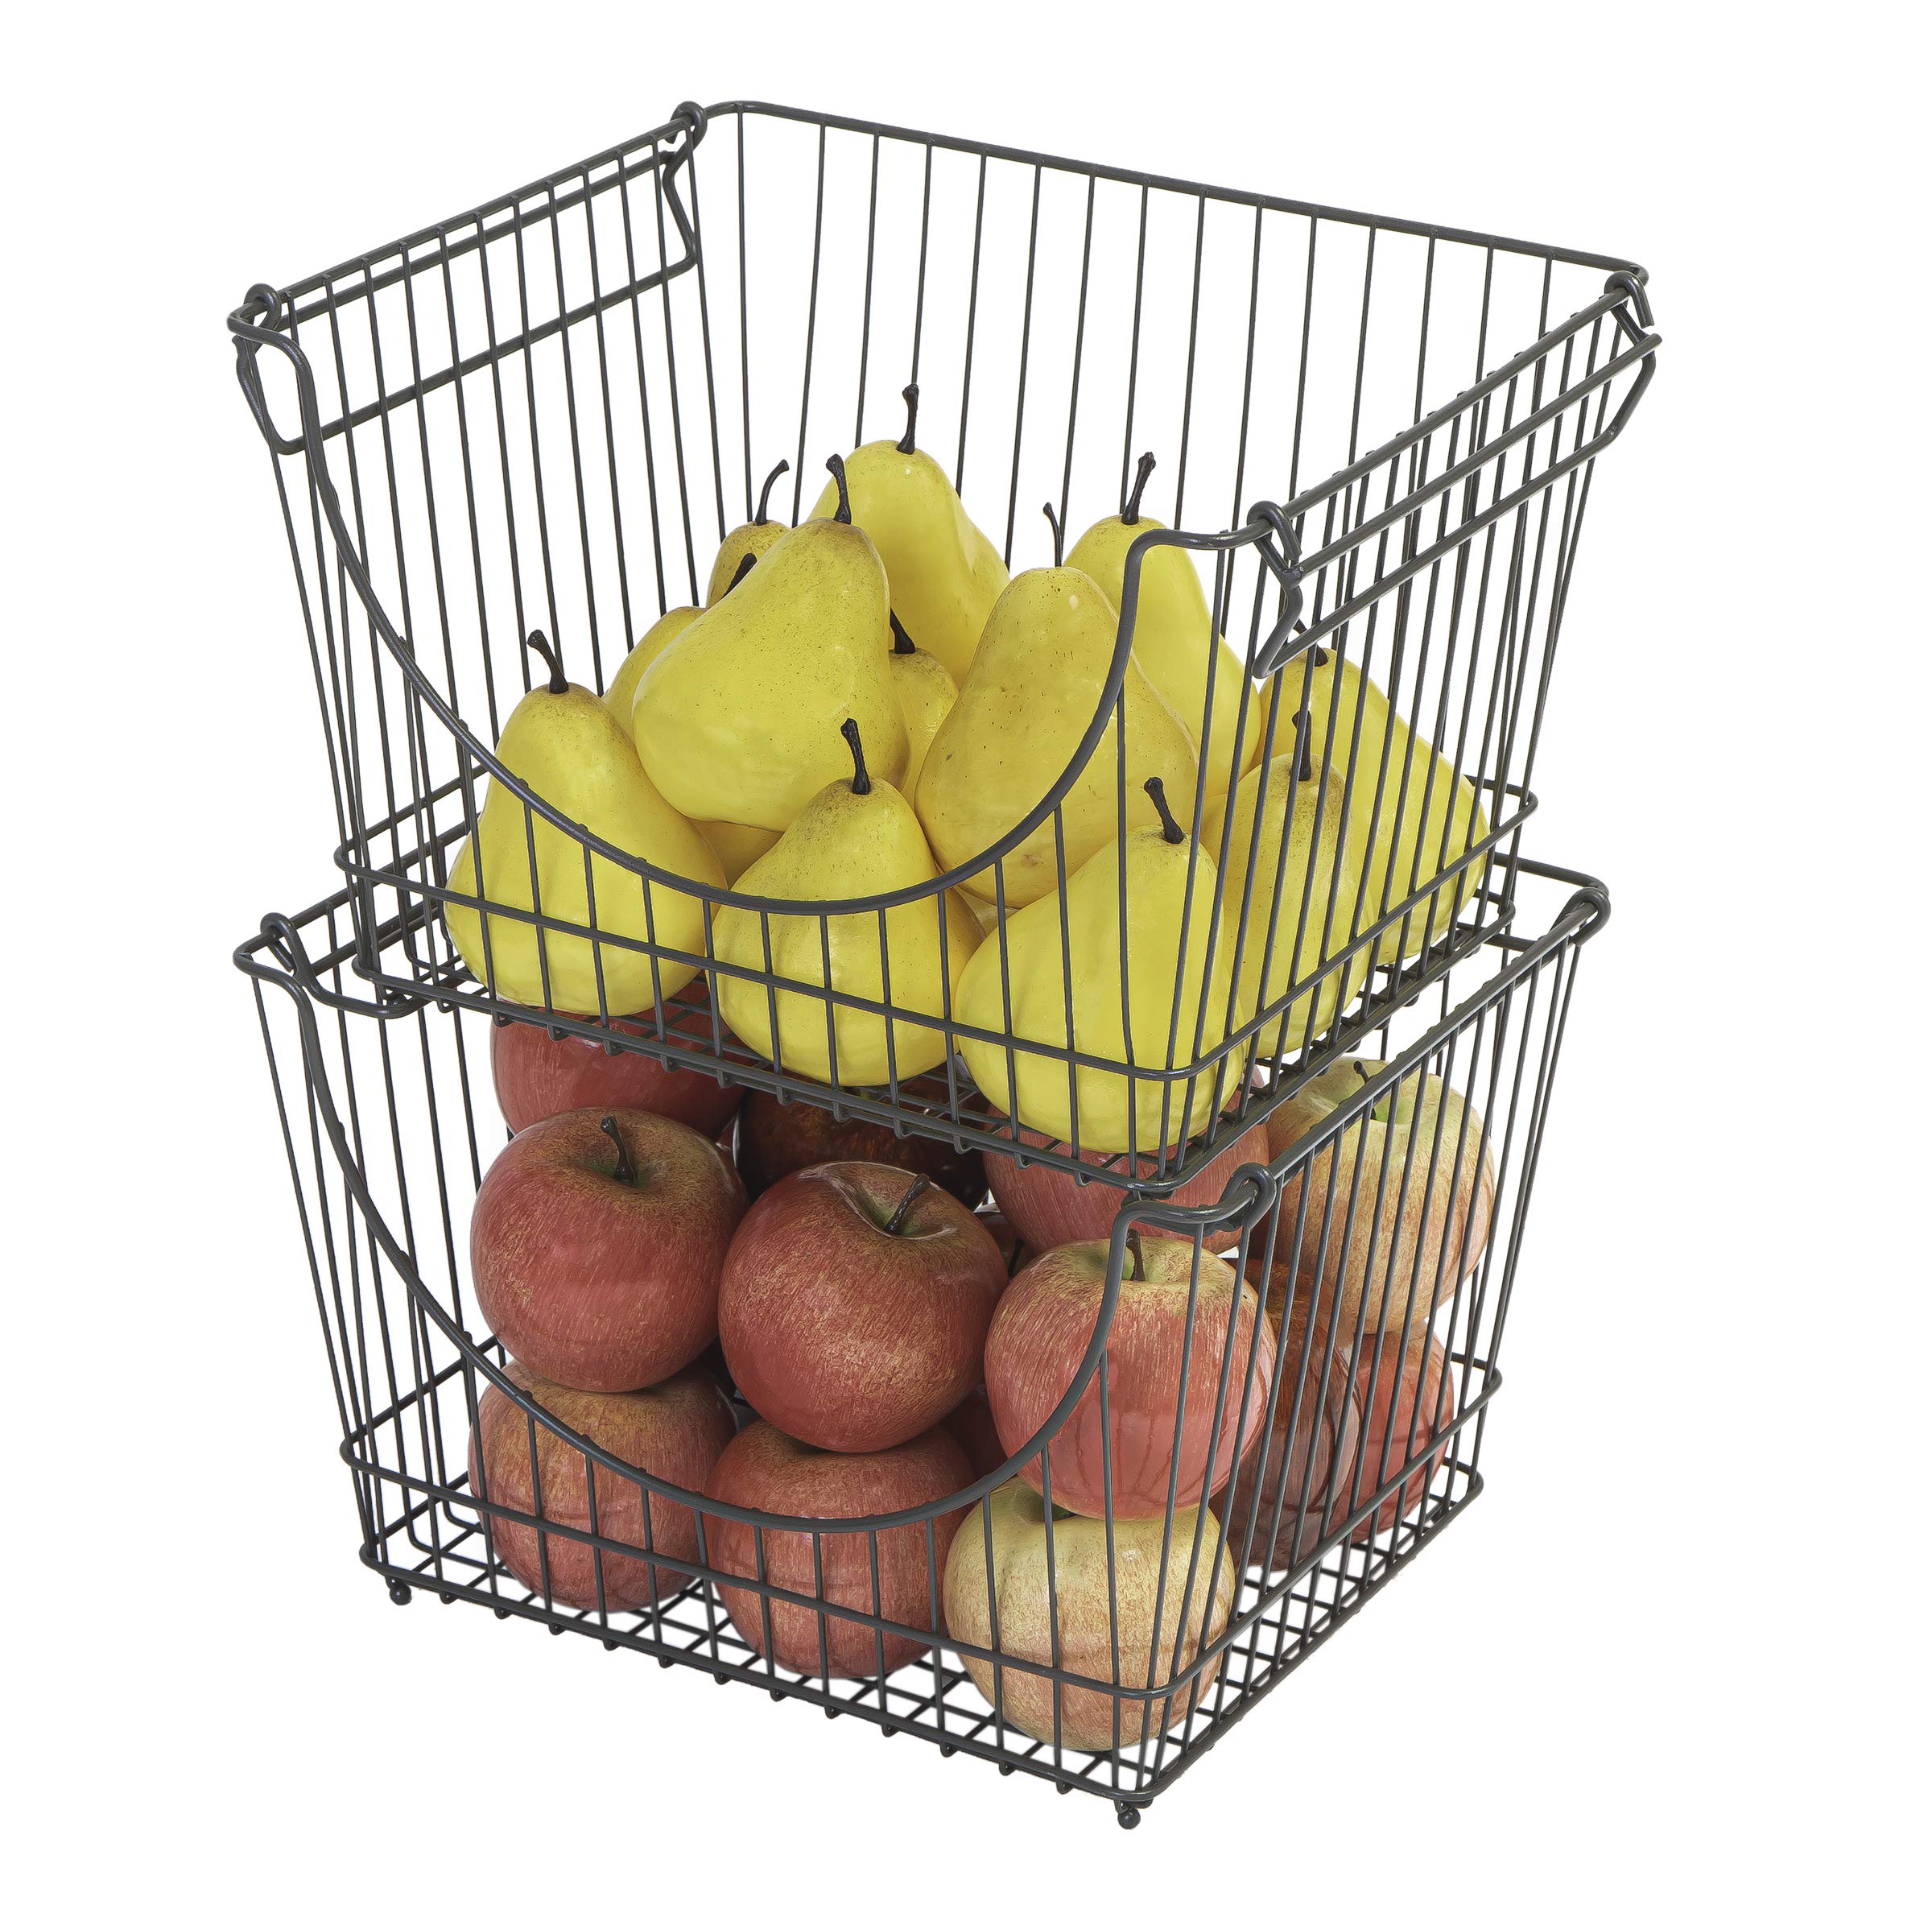 Large Metal Wire Stacking Baskets with Handles - Smart Design® 17